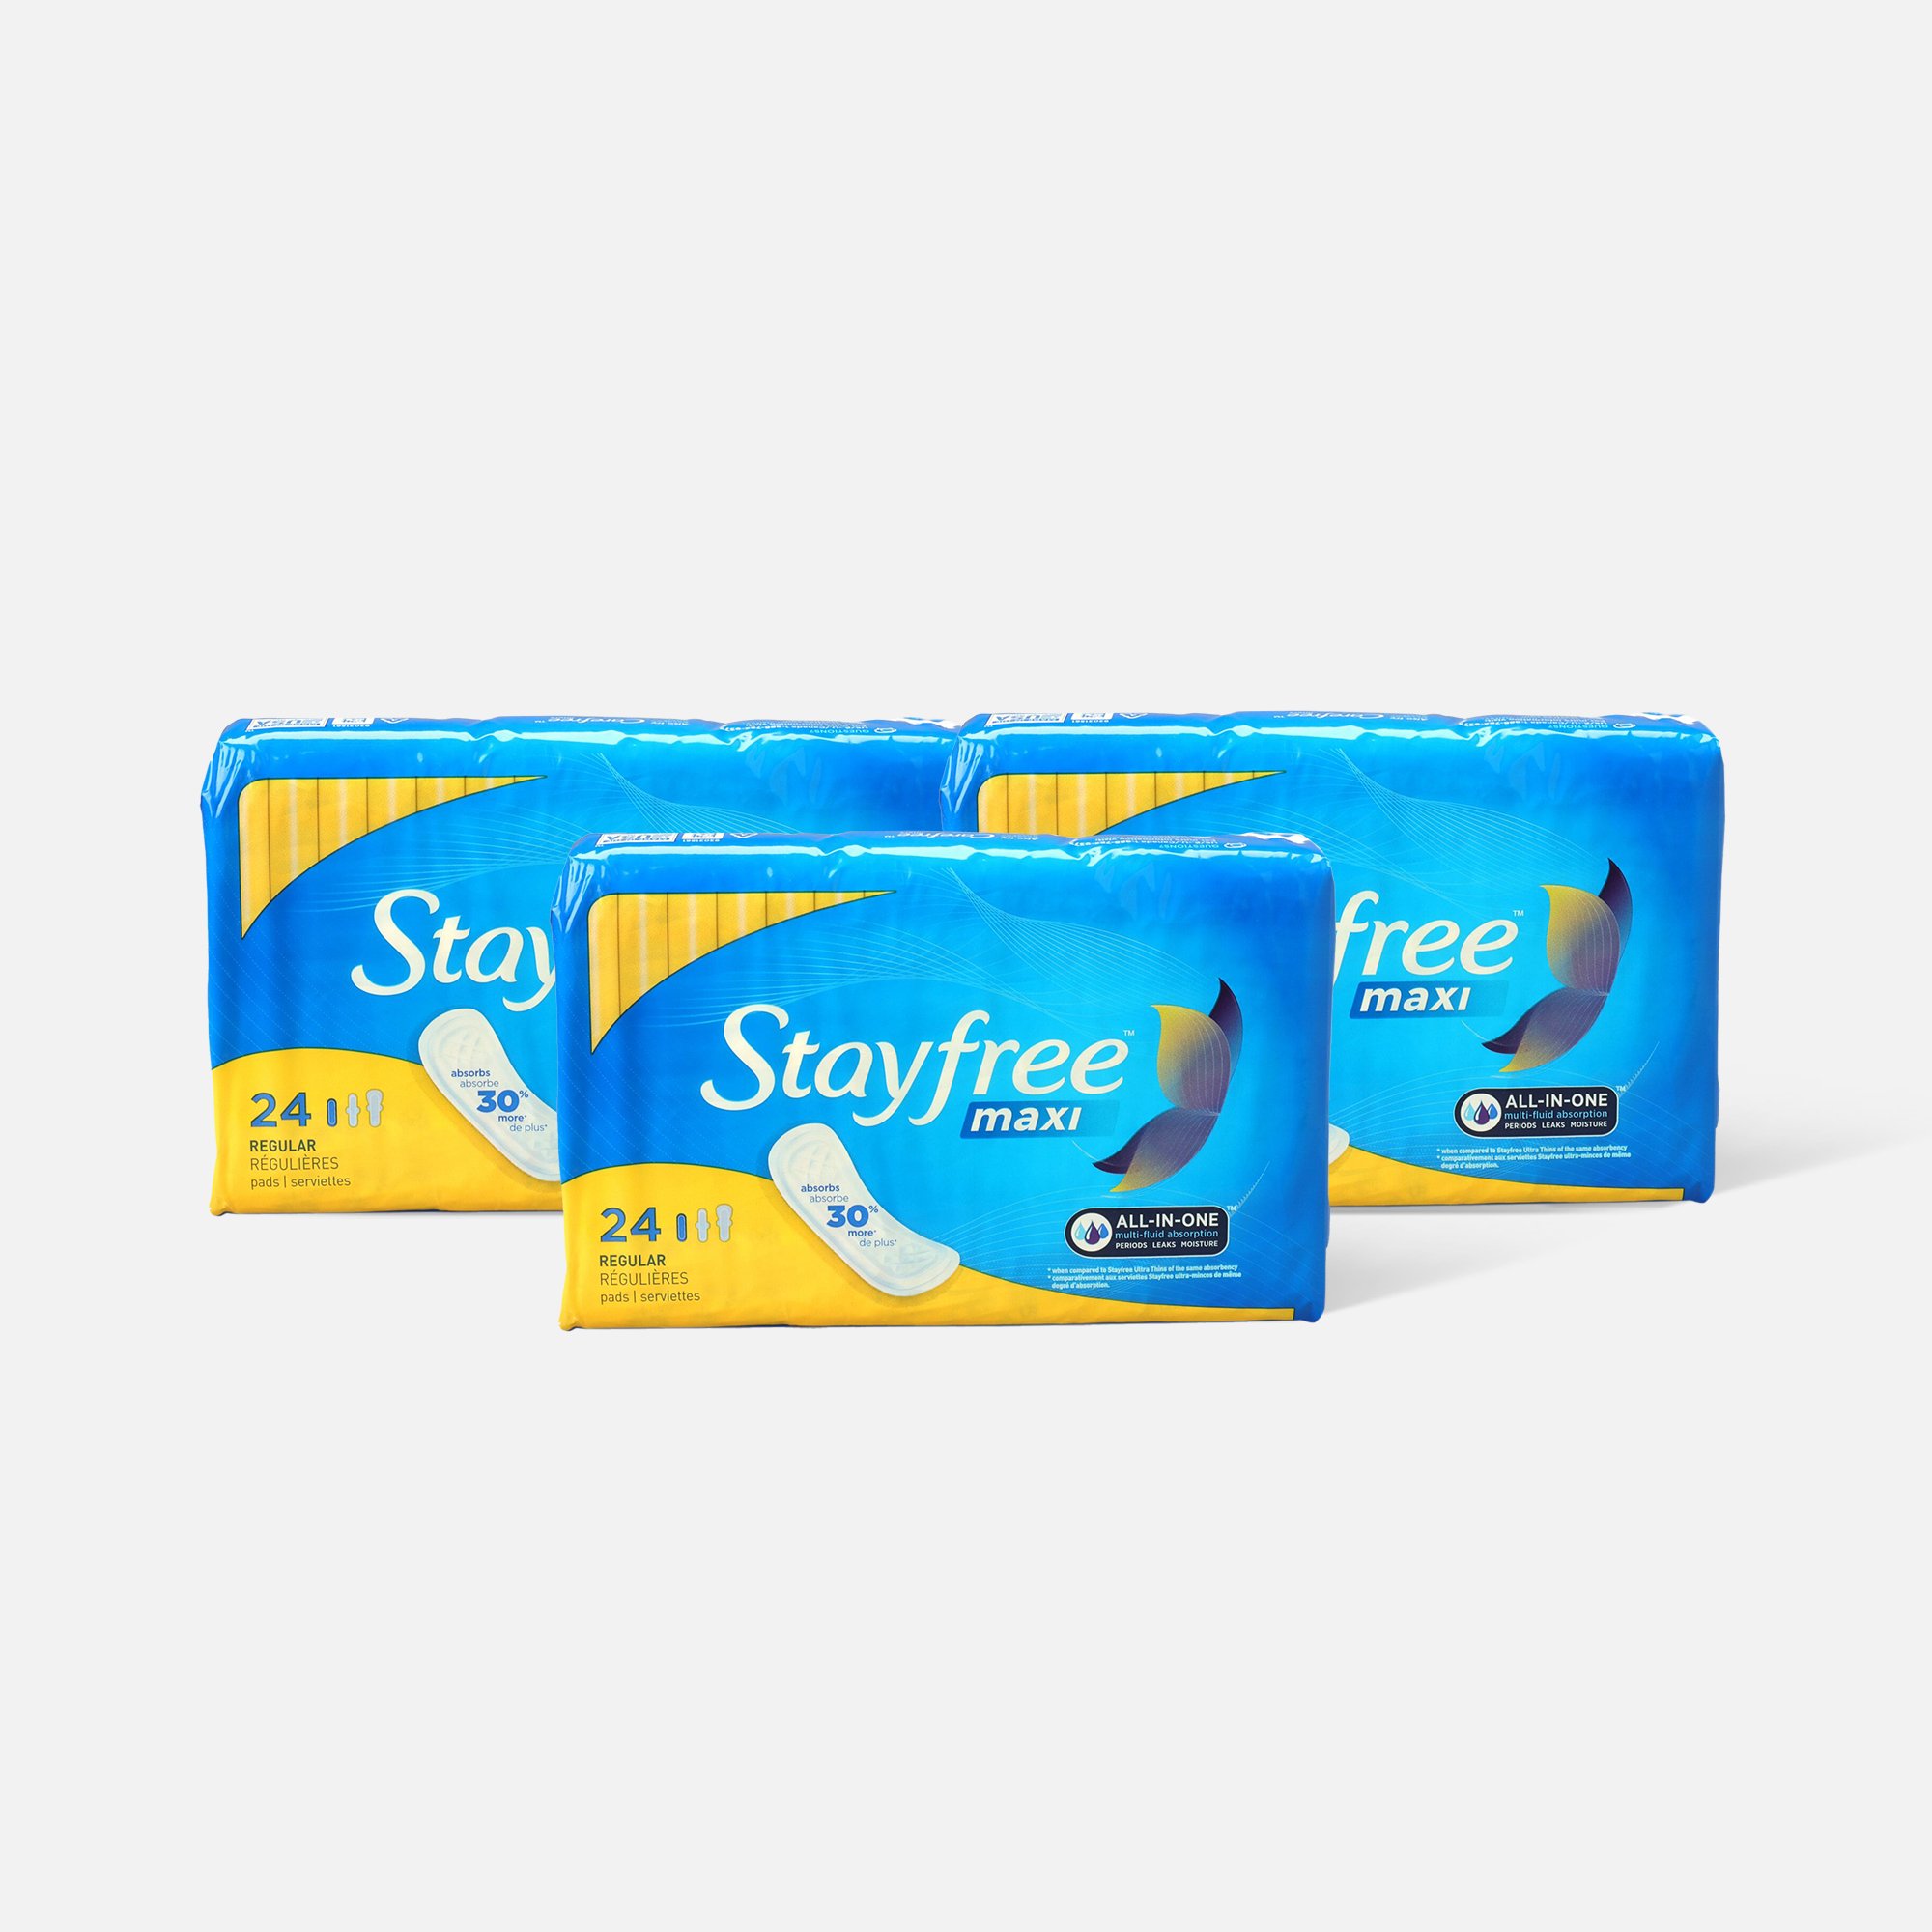 HSA Eligible  Stayfree Maxi Pads Regular, 24 ct. (3-Pack)